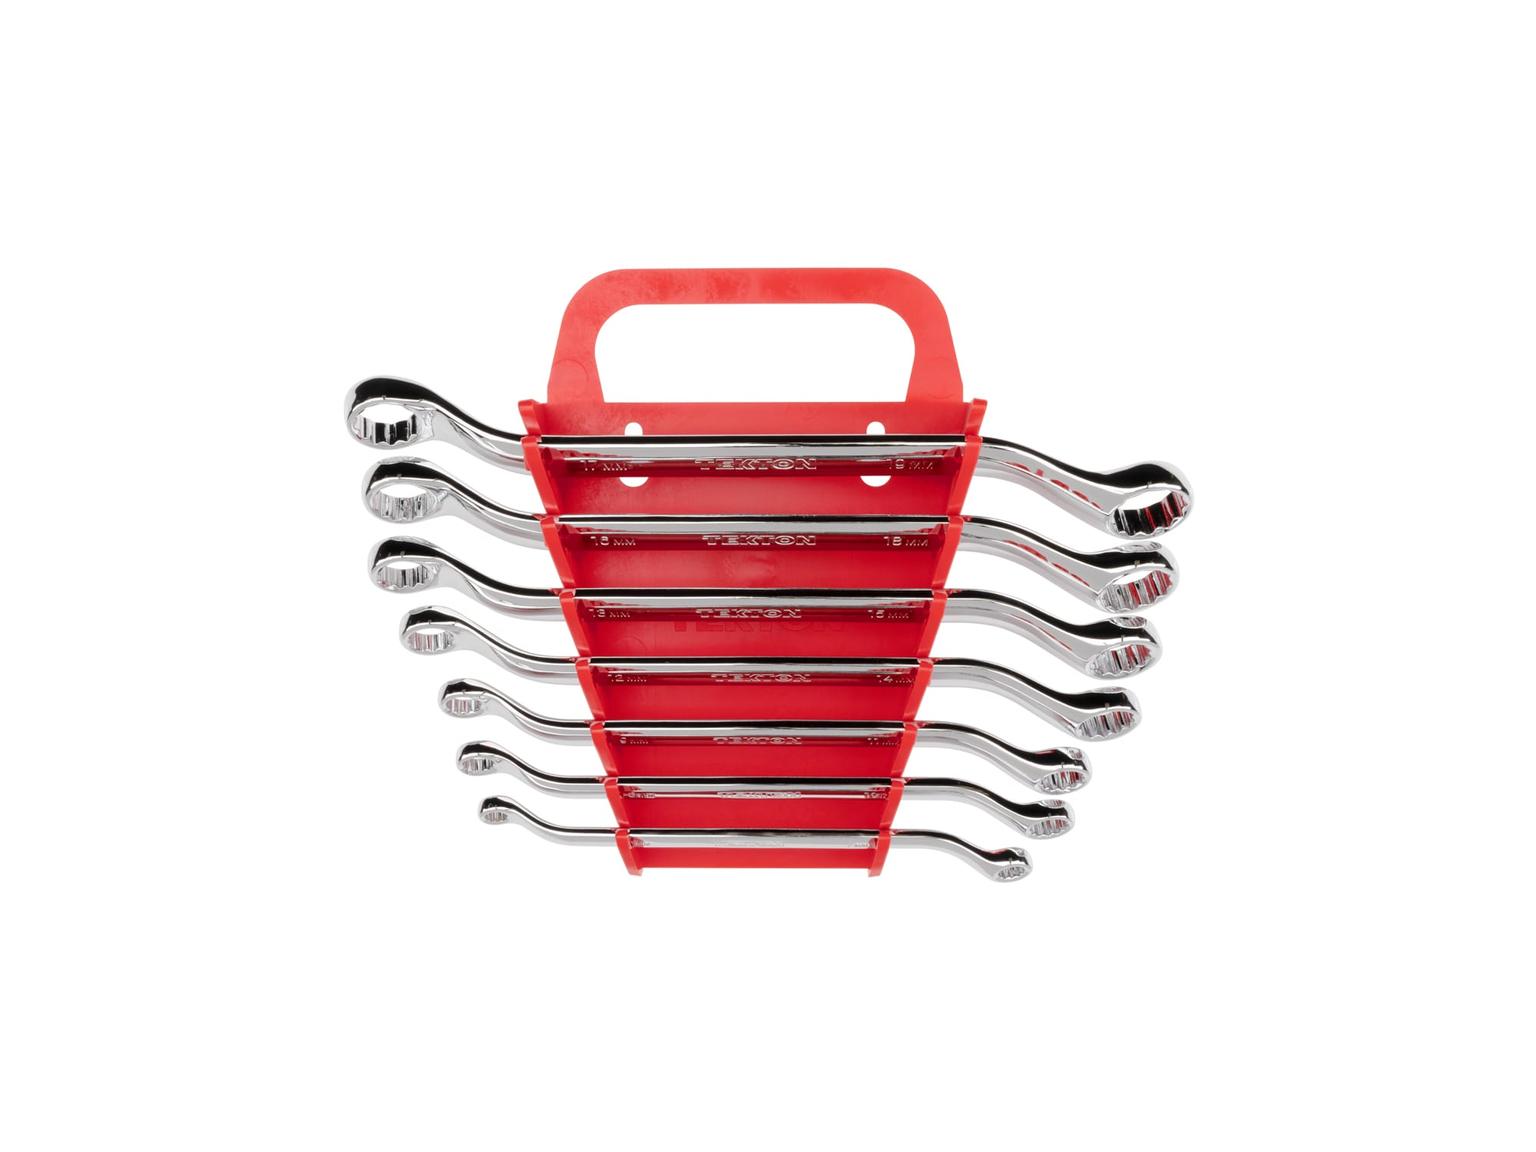 45-Degree Offset Box End Wrench Set, 7-Piece (6-19 mm) with Holder